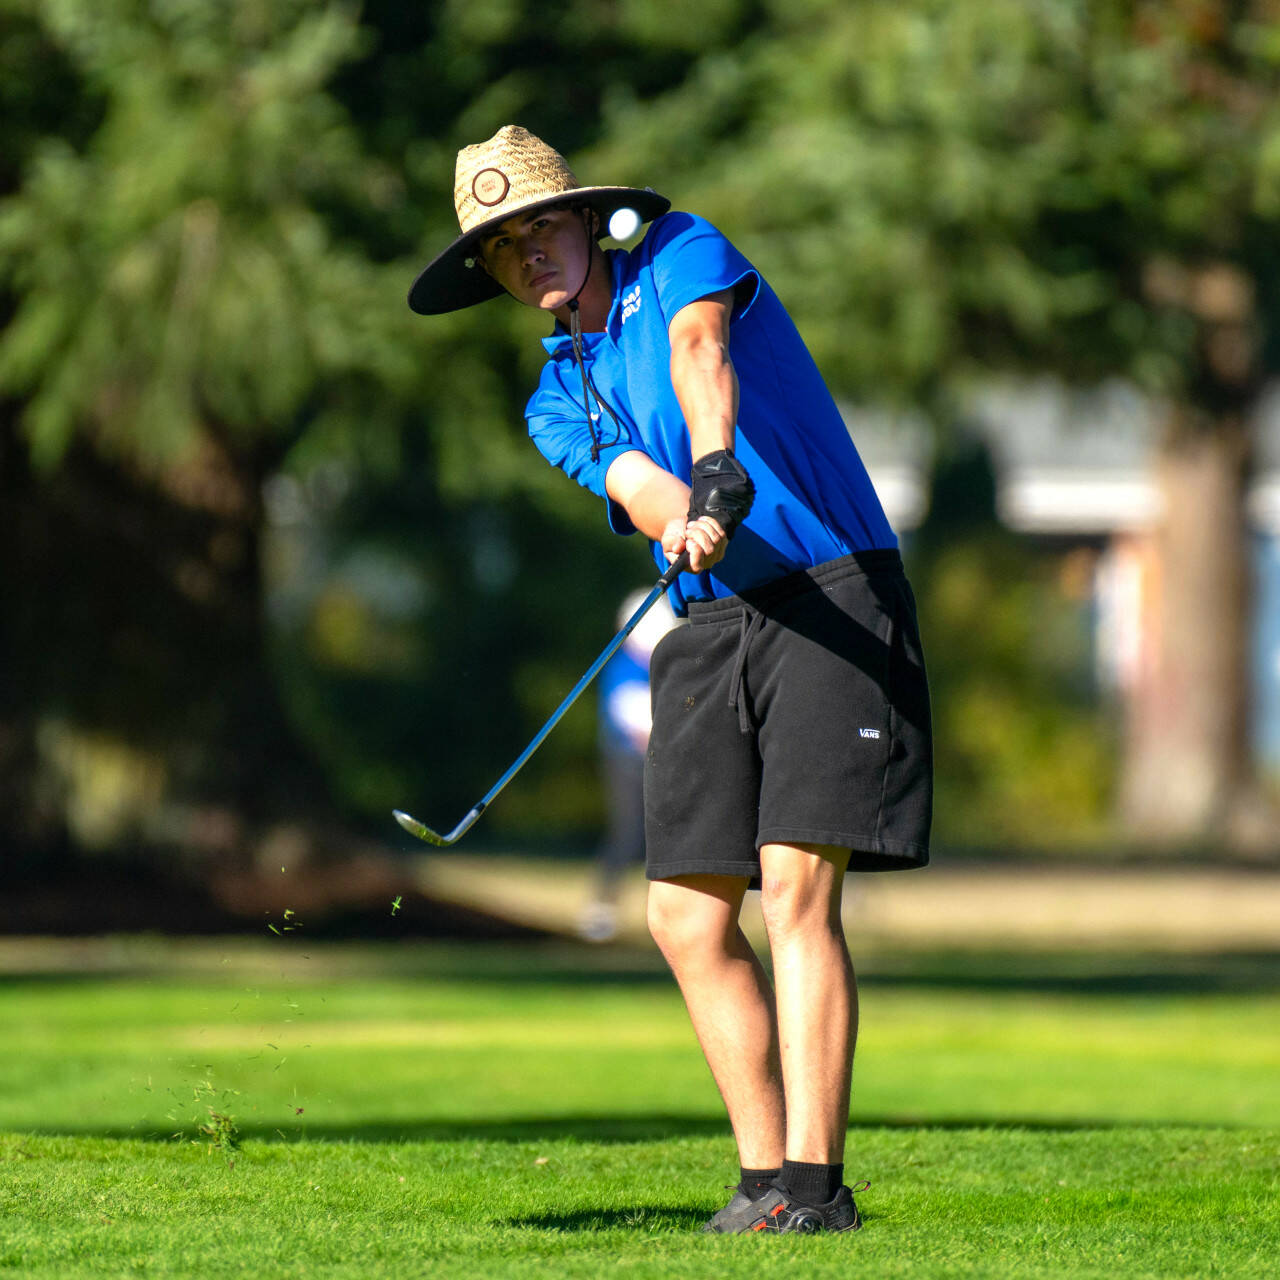 PHOTO BY FOREST WORGUM Elma’s Robby Allen takes an approach shot during a victory over Montesano on Thursday at the Oaksridge Golf Course. Allen earned co-Medalist of the Match with a round of 40.